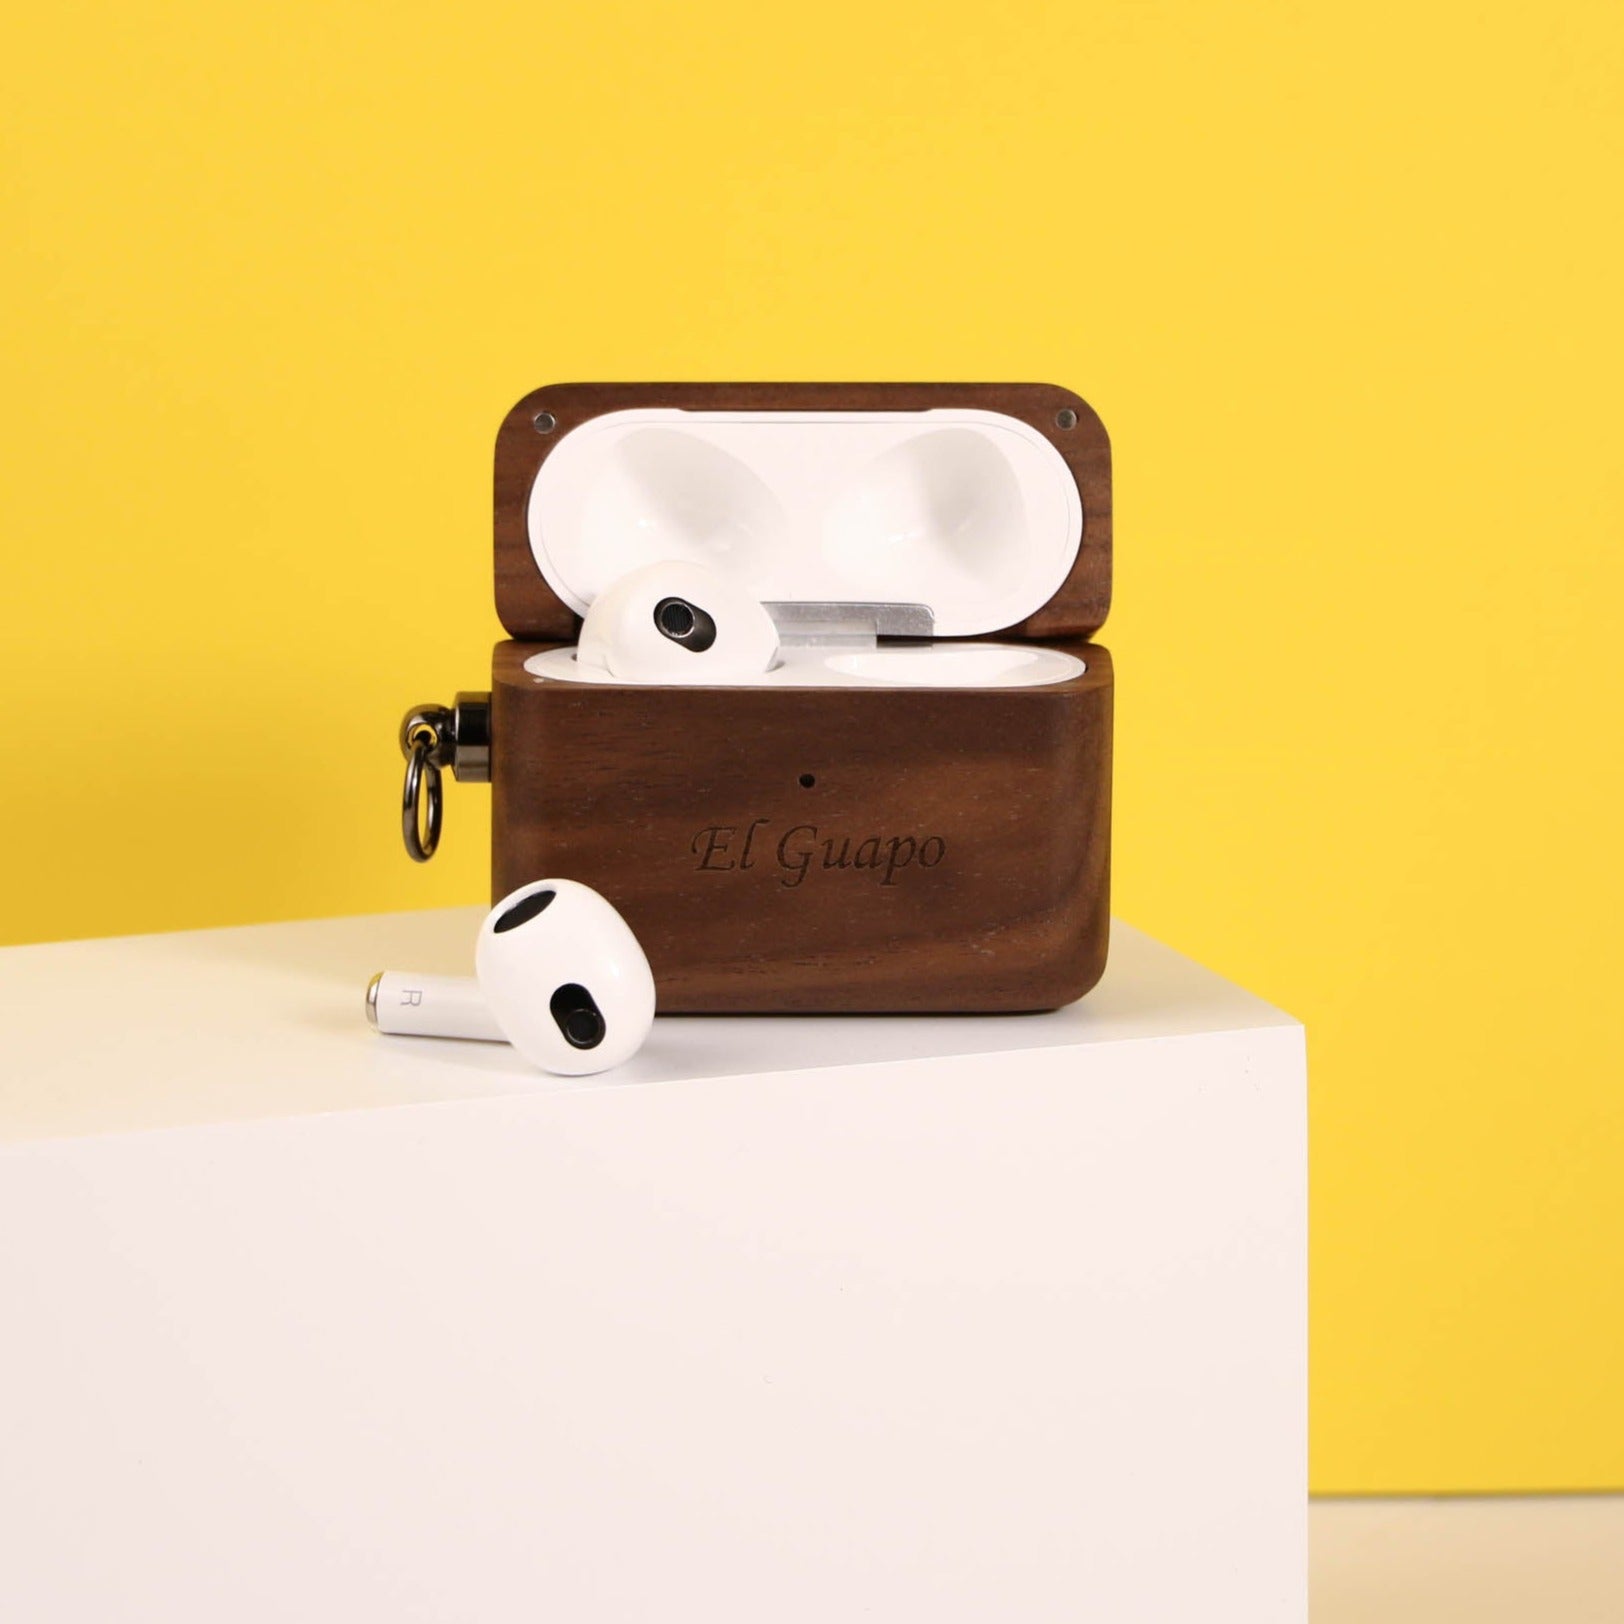 wood Airpods 3rd Generation Case with text engraving